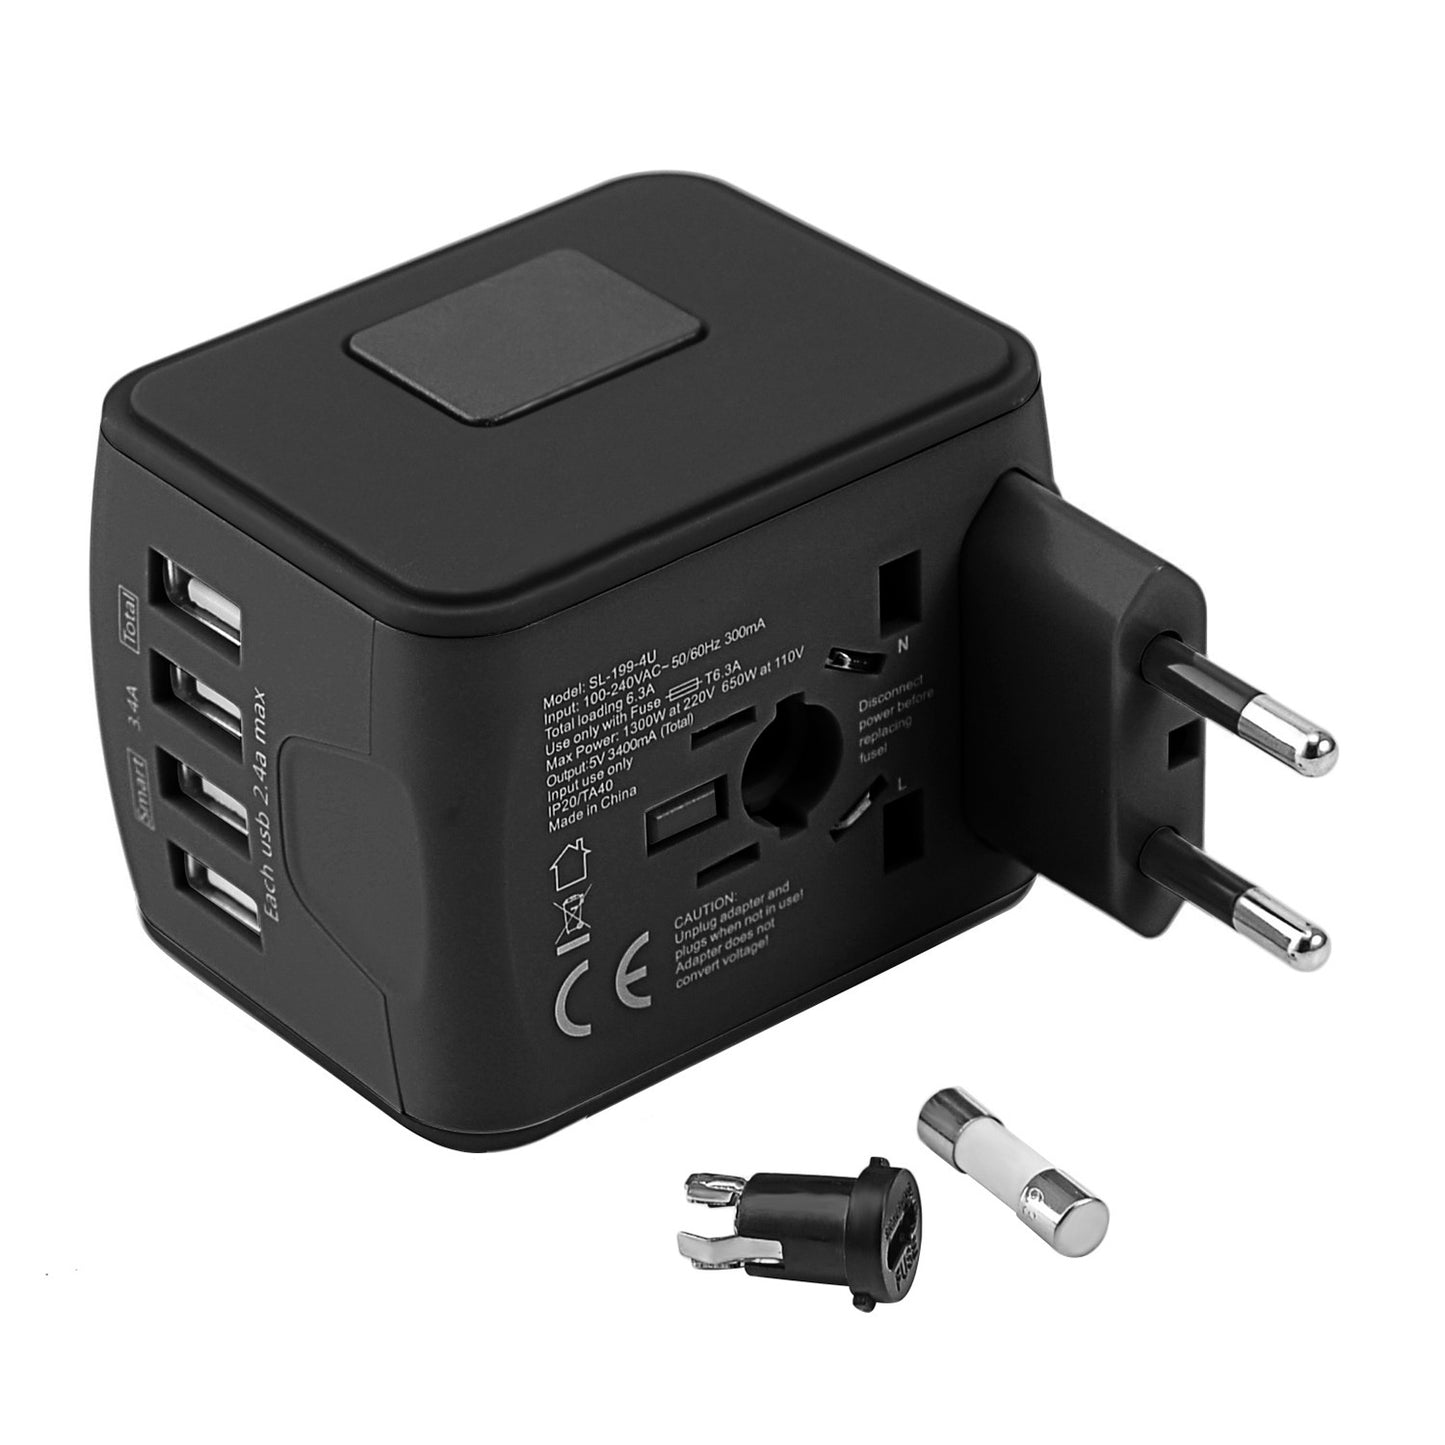 JMFONE International Travel Adapter Universal Power Adapter Worldwide All in One 4 USB with Electrical Plug Perfect for European US, EU, UK, AU 160 Countries (Black)